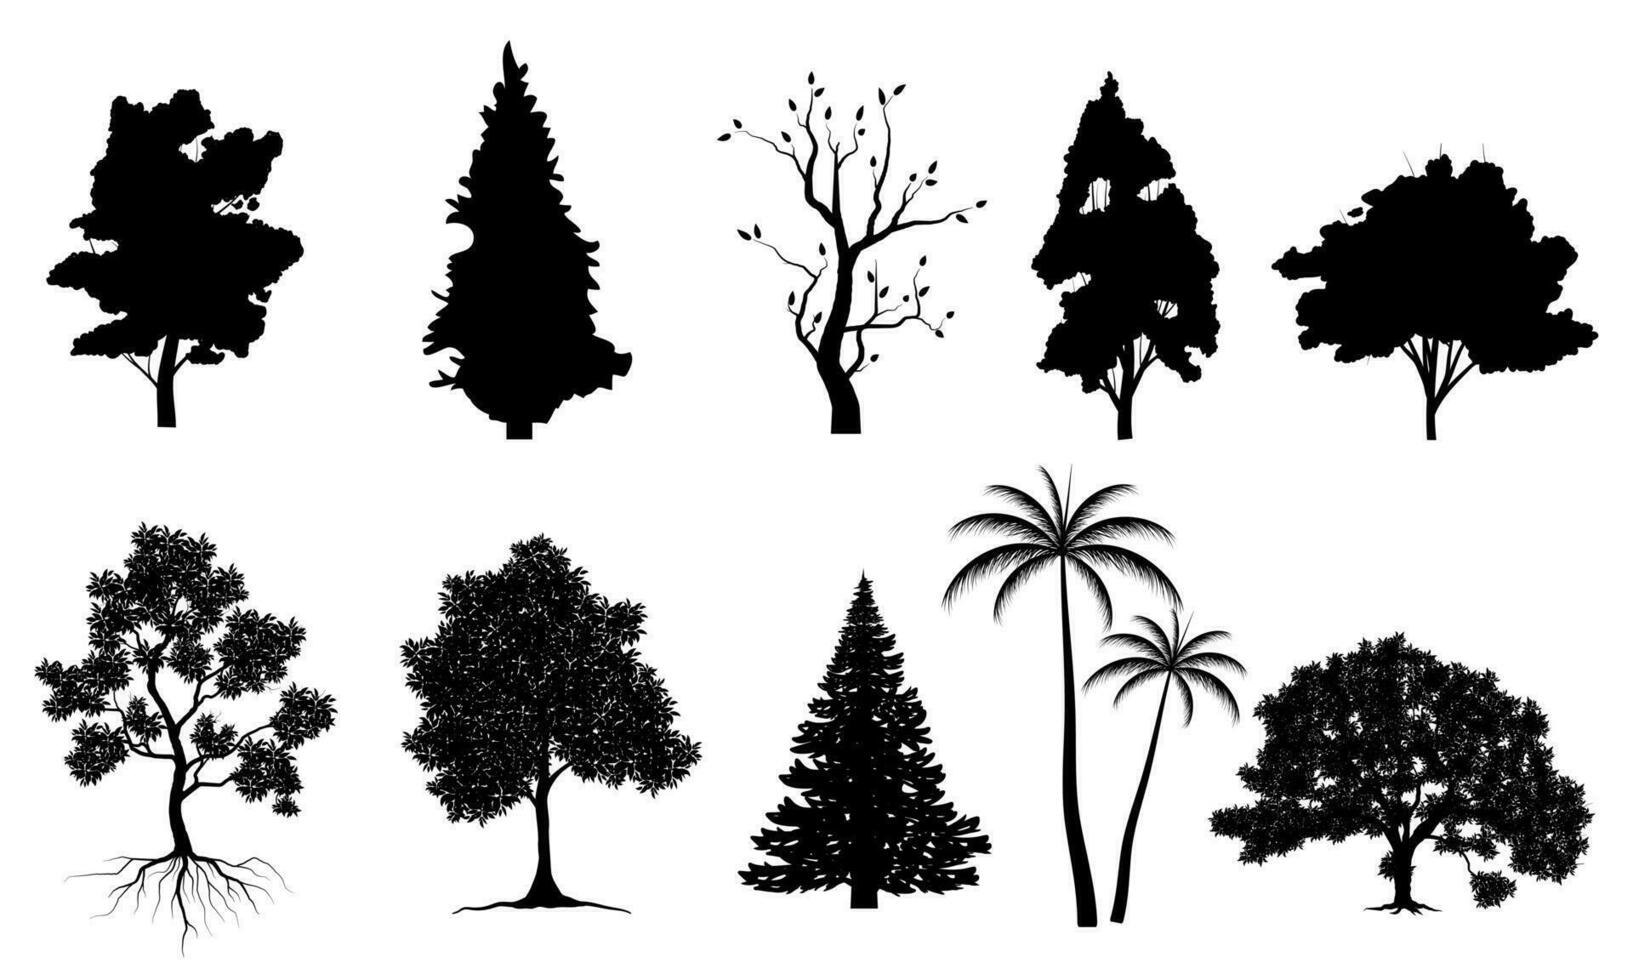 collection isolated tree Symbol silhouette style on white background. Can be used for your work. vector